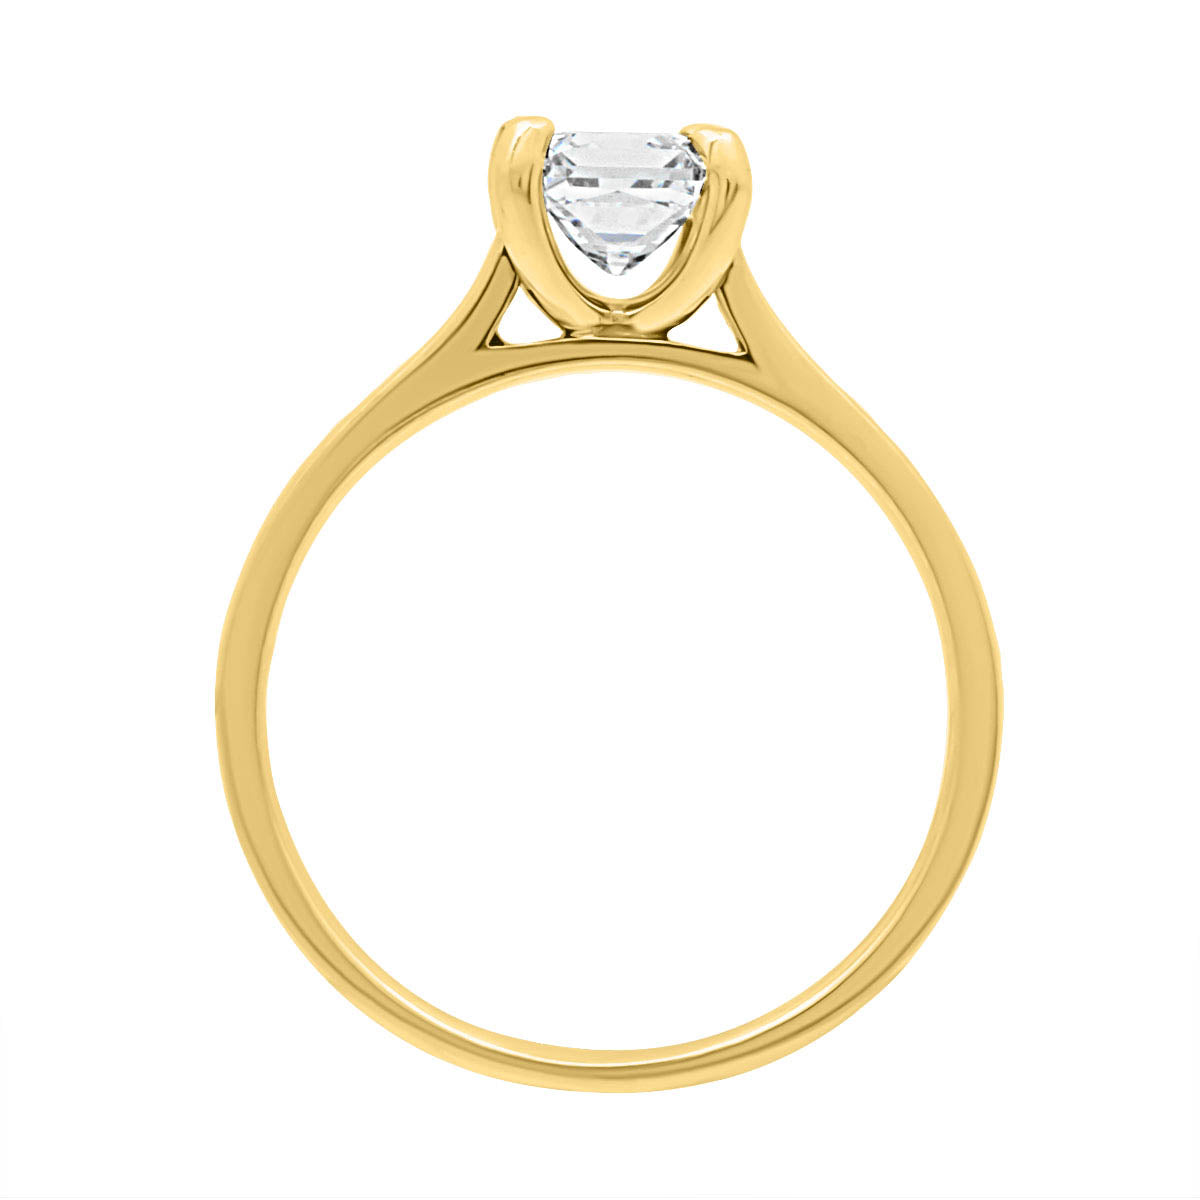 Princess cut engagement ring in yellow gold in an upright position